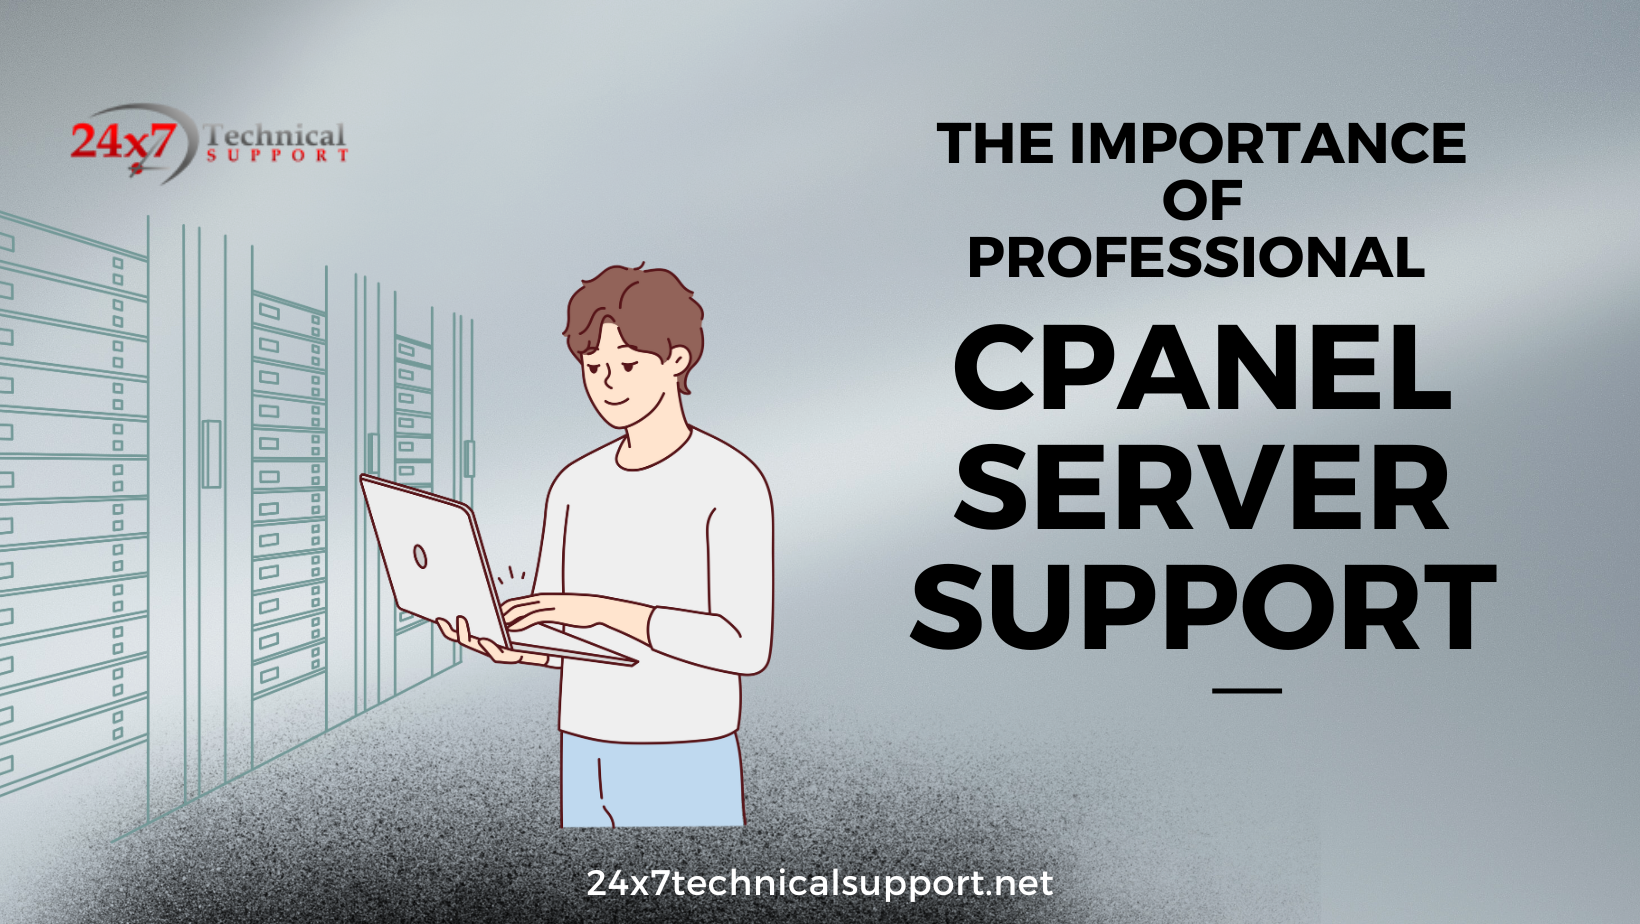 cPanel server support